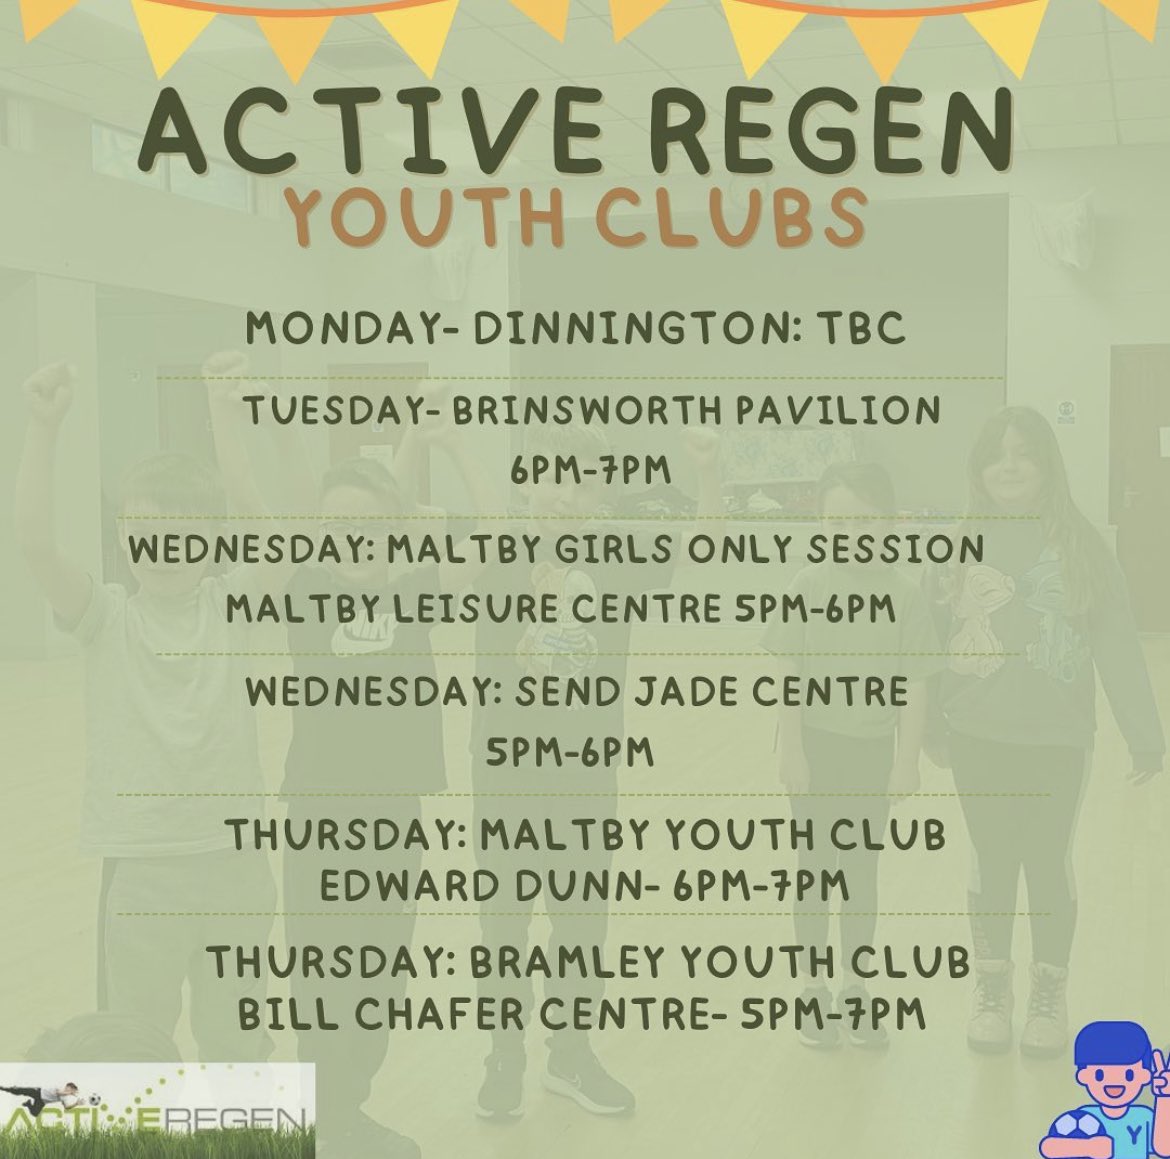 ACTIVE REGEN YOUTH CLUBS🙌

Listed below are our current youth programmes which are based in and around the Rotherham area!

#activeregen #youthclubs #brinsworth #maltby  #bramley #activeregenrotherham #youthactivities #rotherham #southyorkshire